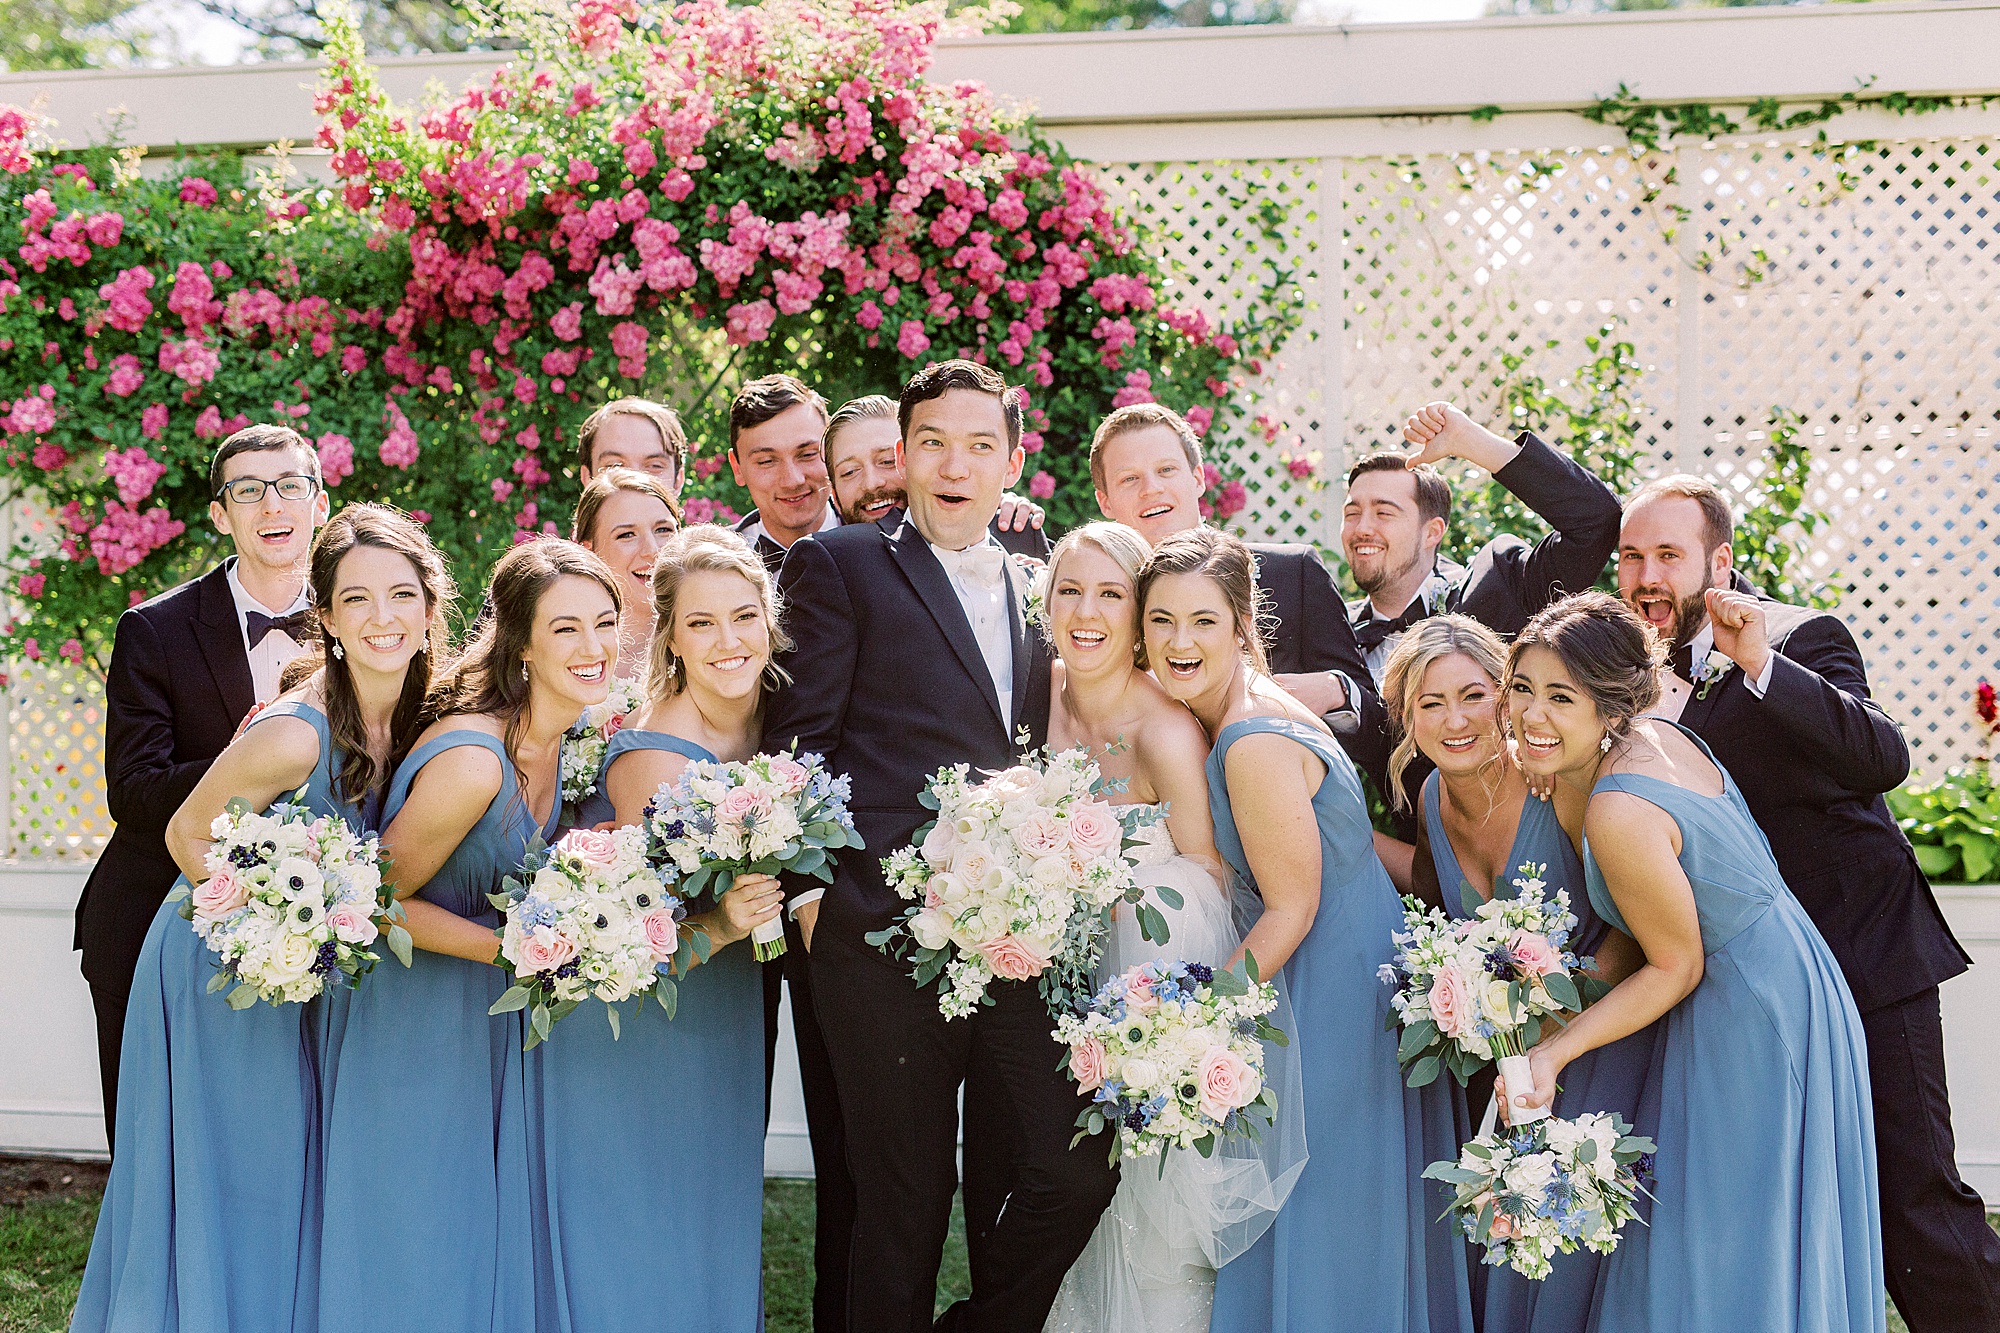 wedding party in blue and black laughs with bride and groom